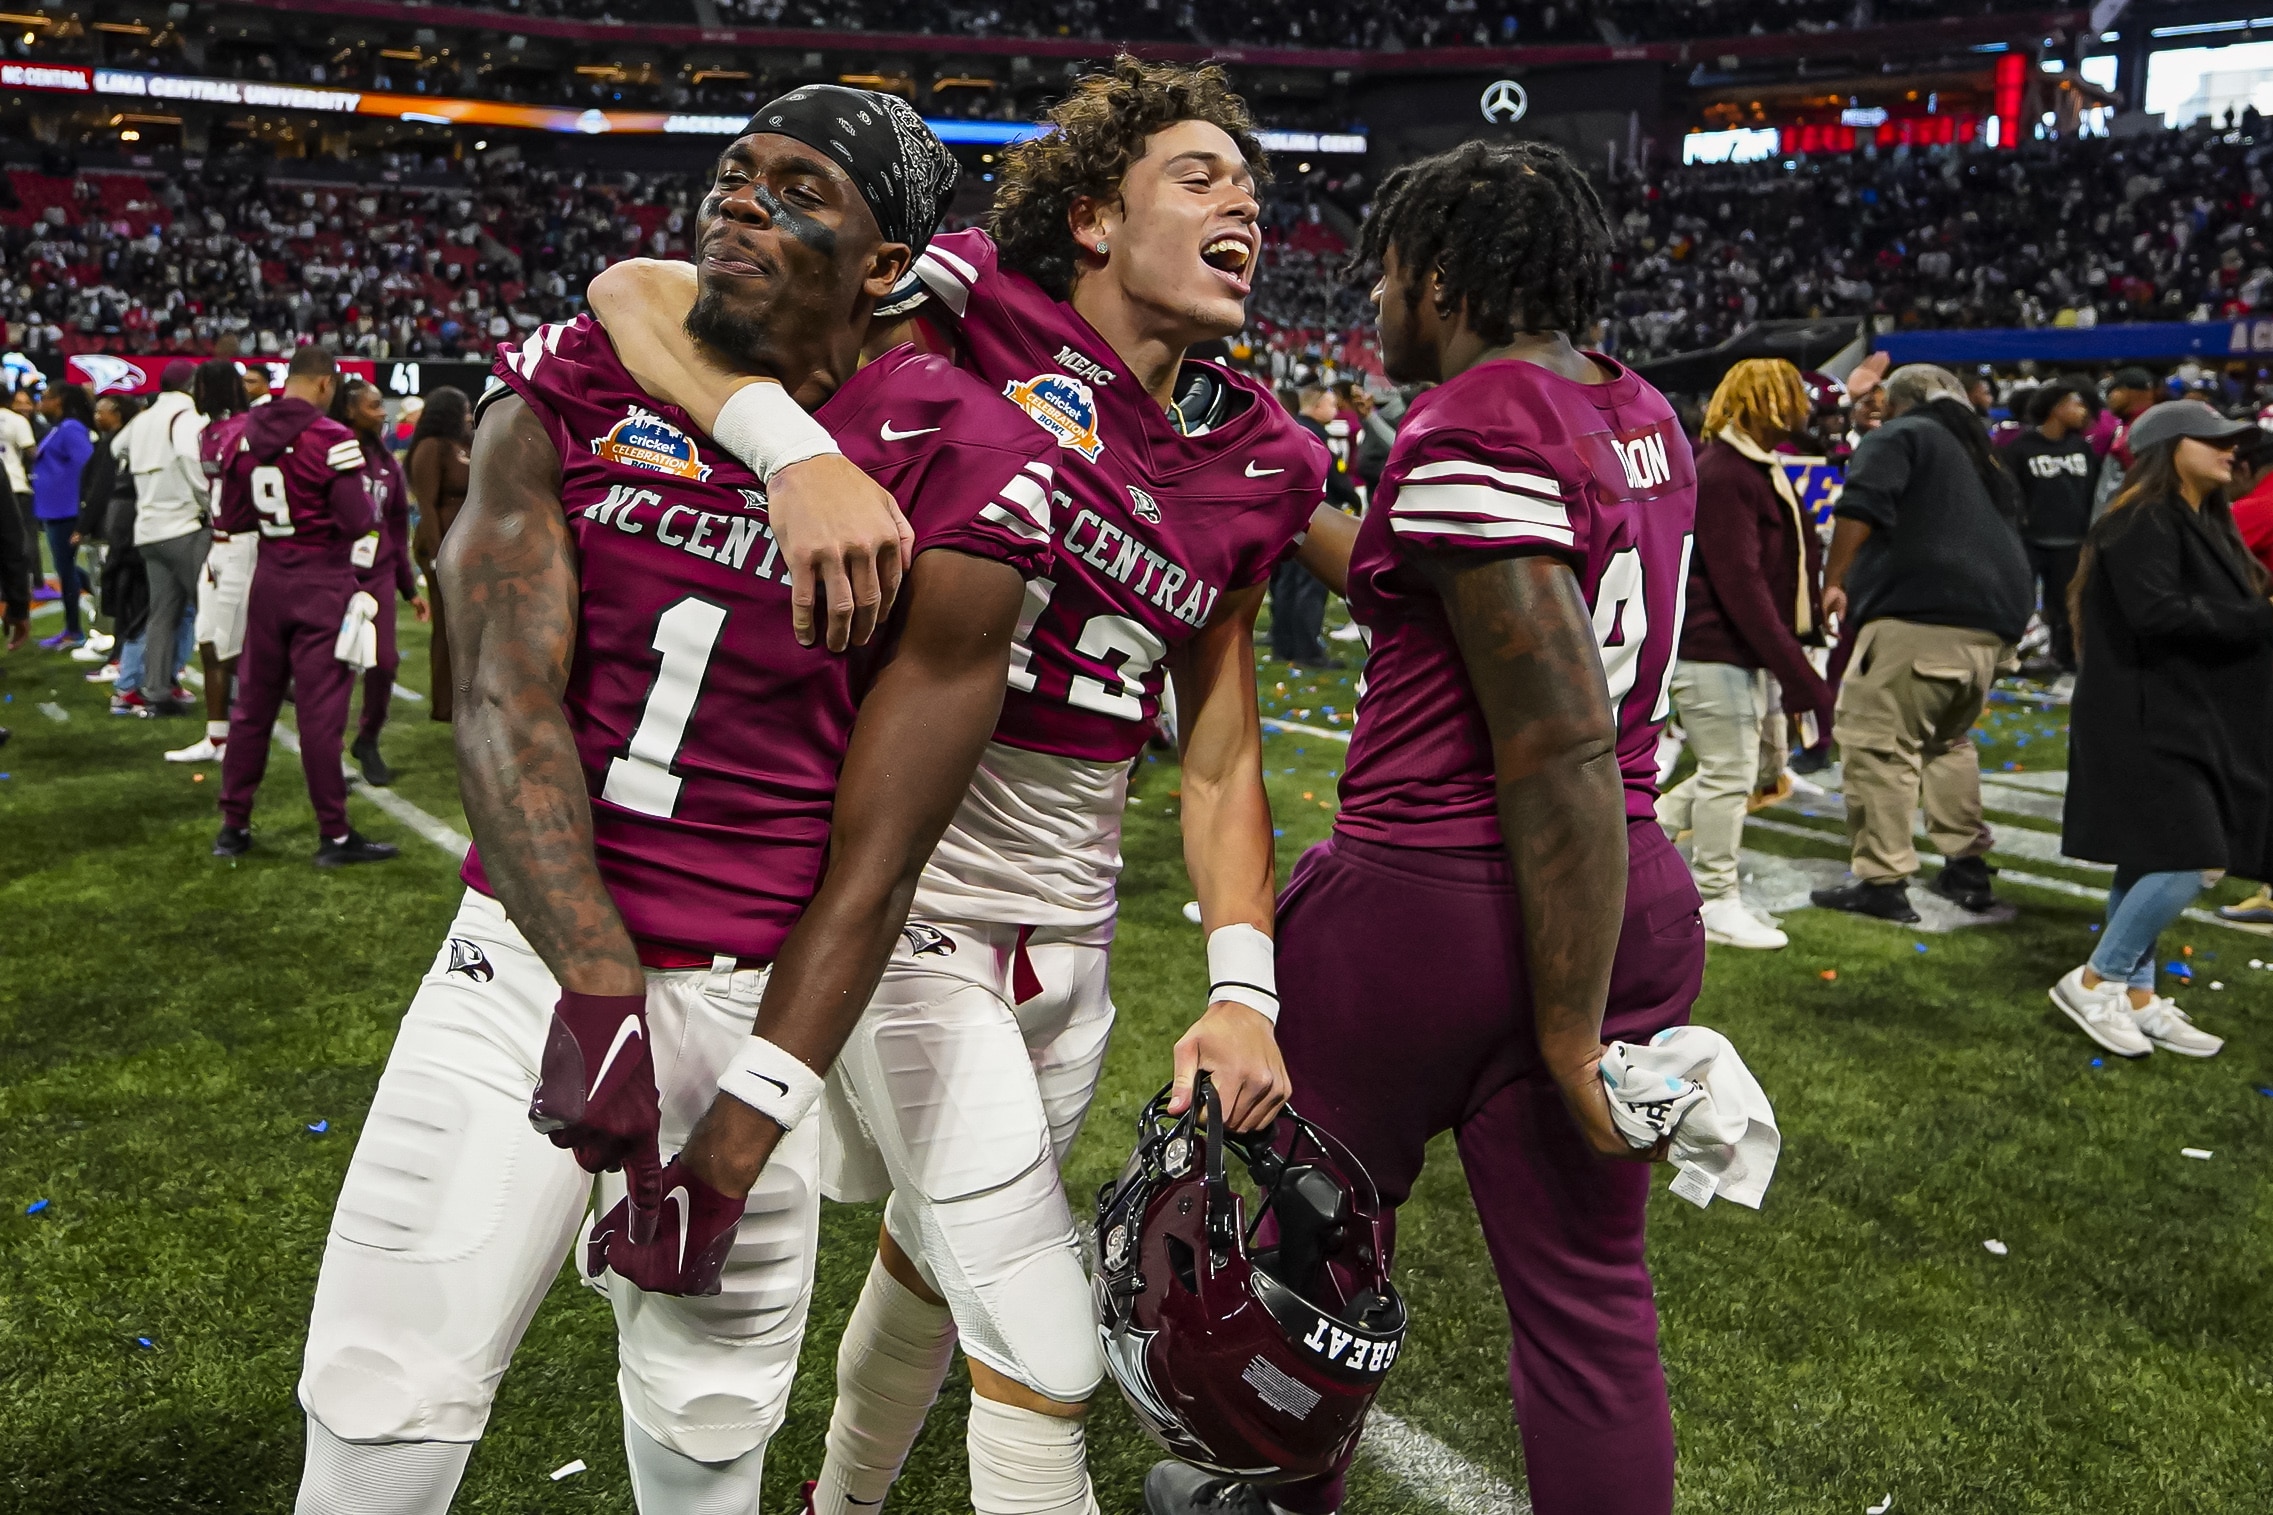 NC Central players celebrate after beating Jackson State in the Celebration Bowl